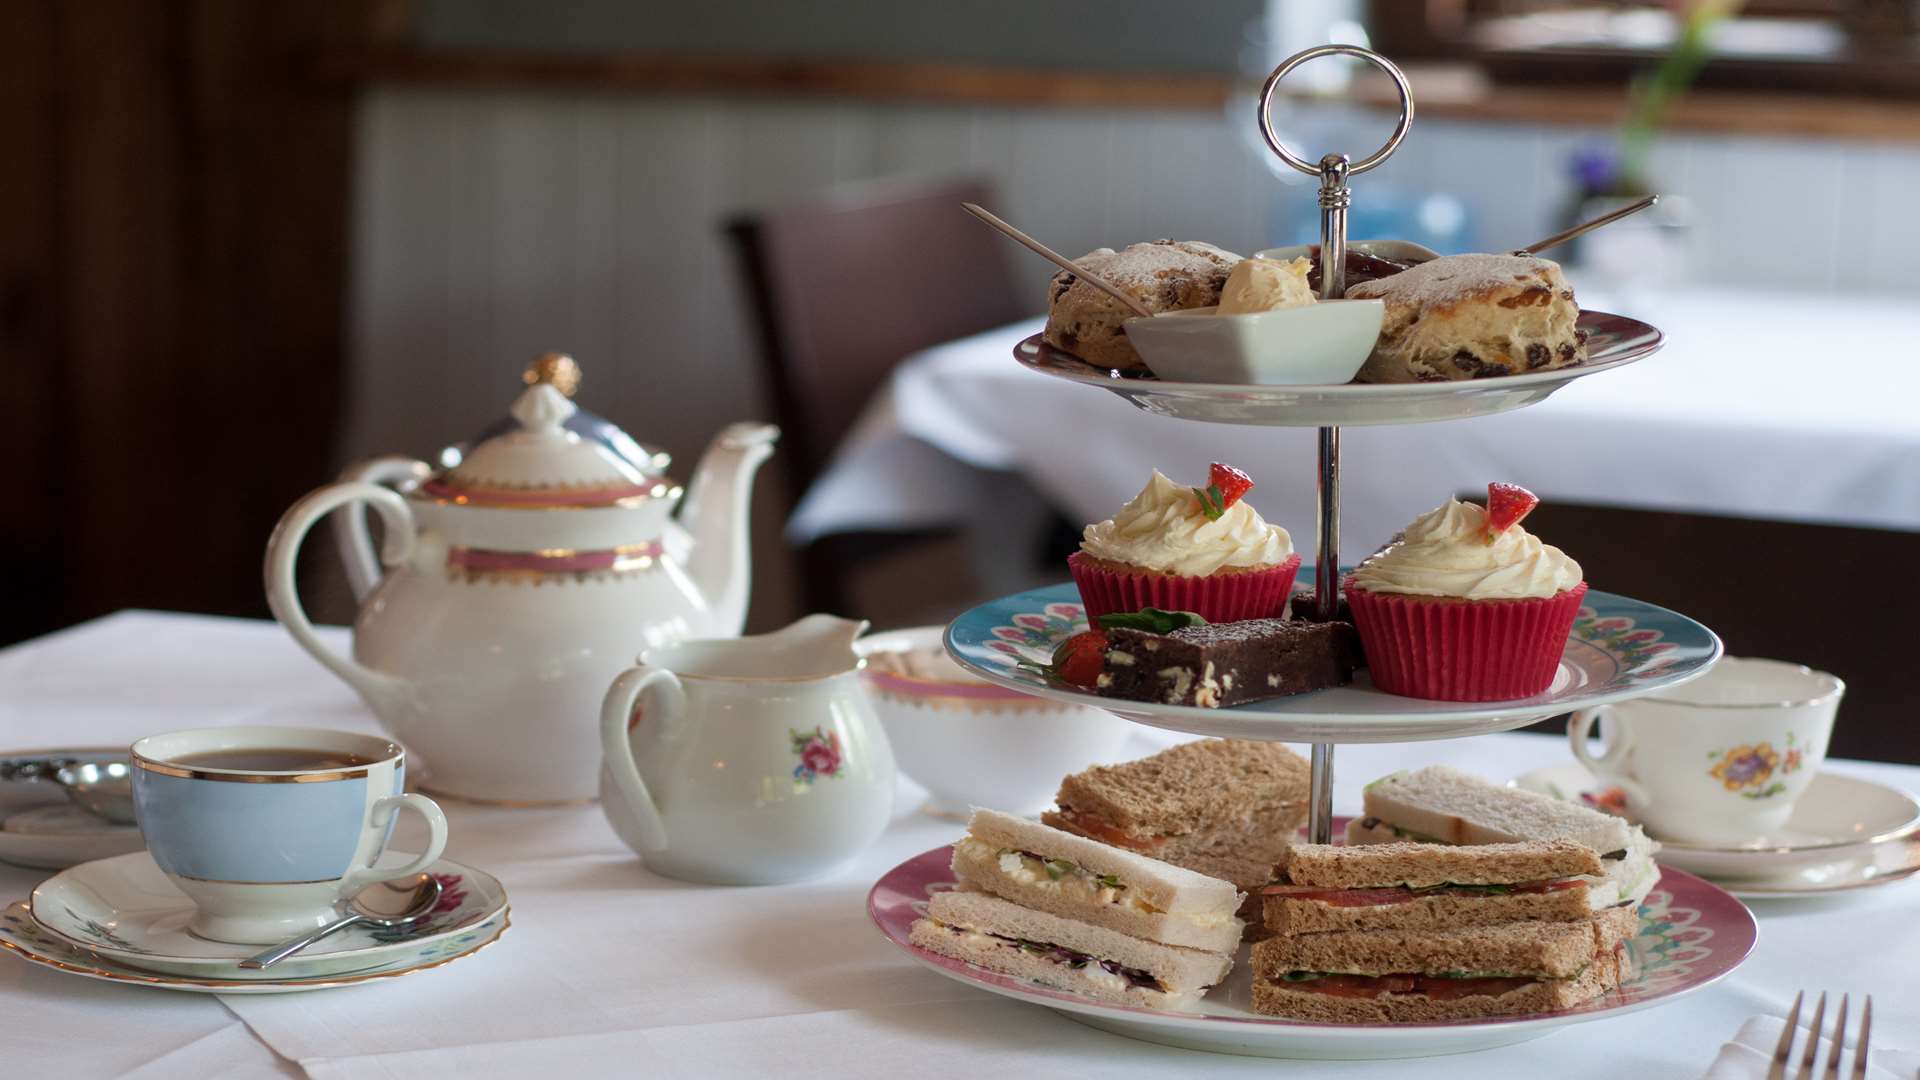 Afternoon tea at Elvey Farm in Pluckley